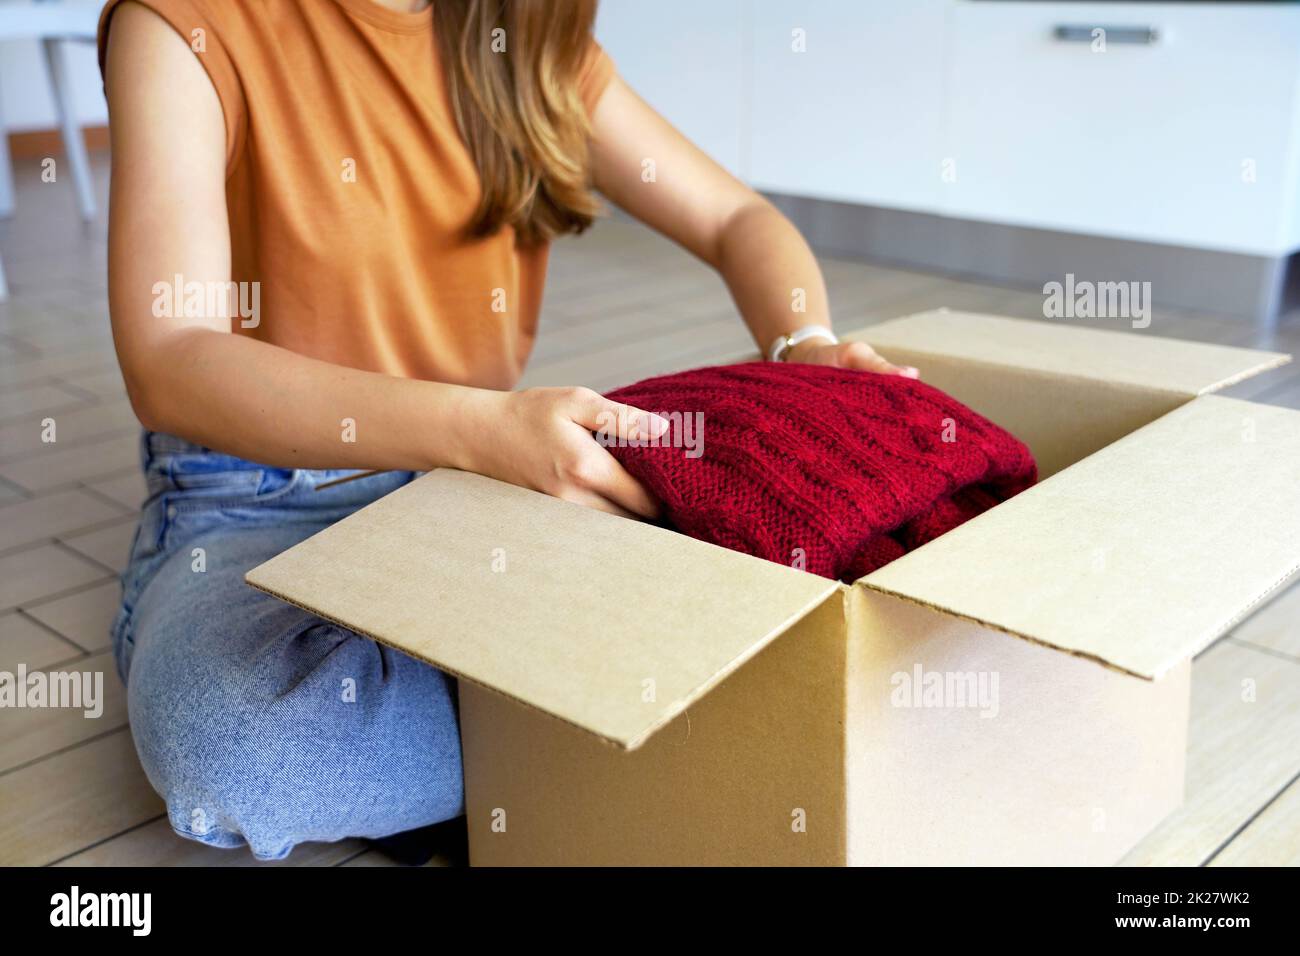 Second hand clothes. Beautiful young woman preparing donation box with clothing. Stock Photo